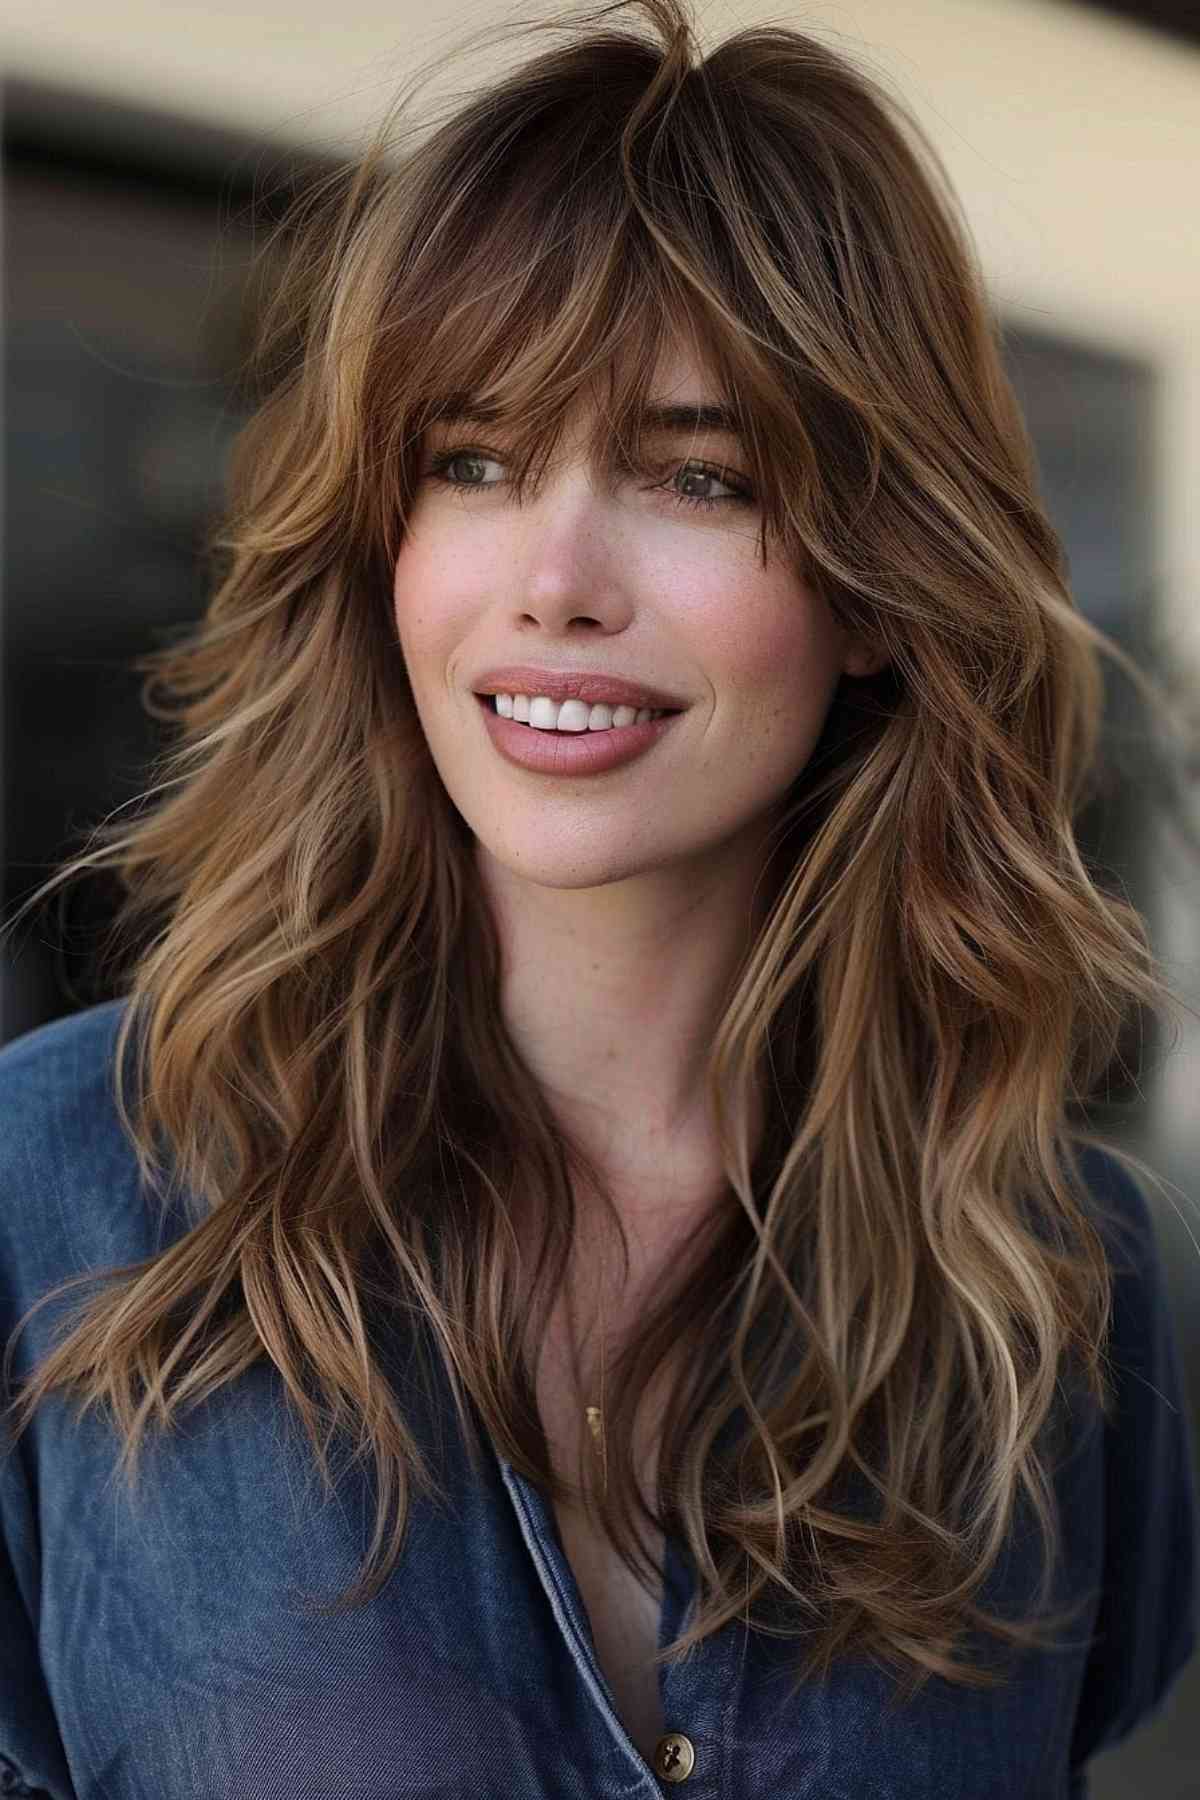 Long hair with soft curtain bangs creates a romantic atmosphere that suits the oval face.